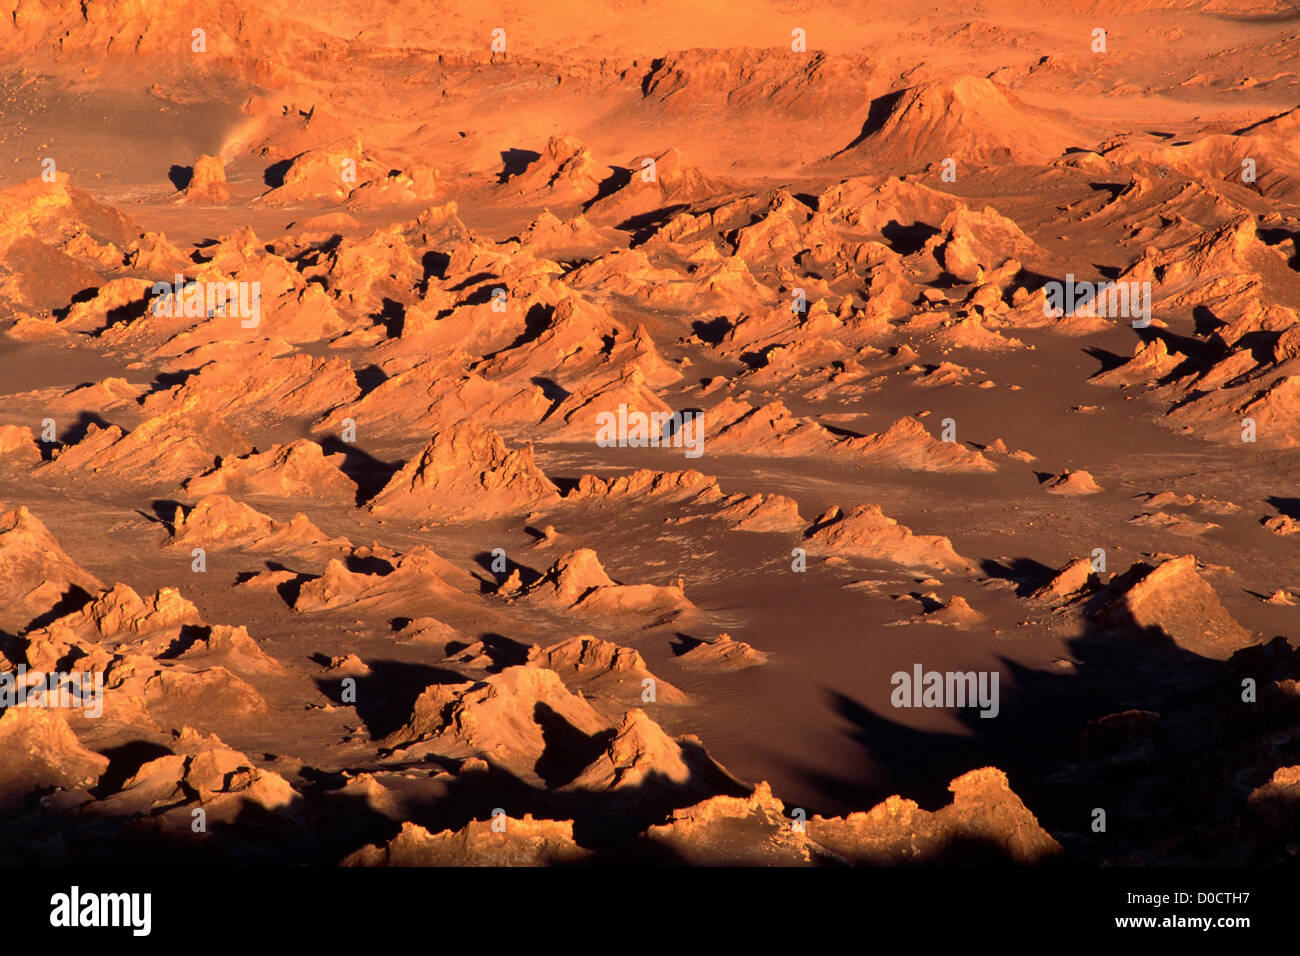 Badlands of the Valley of the Moon Stock Photo